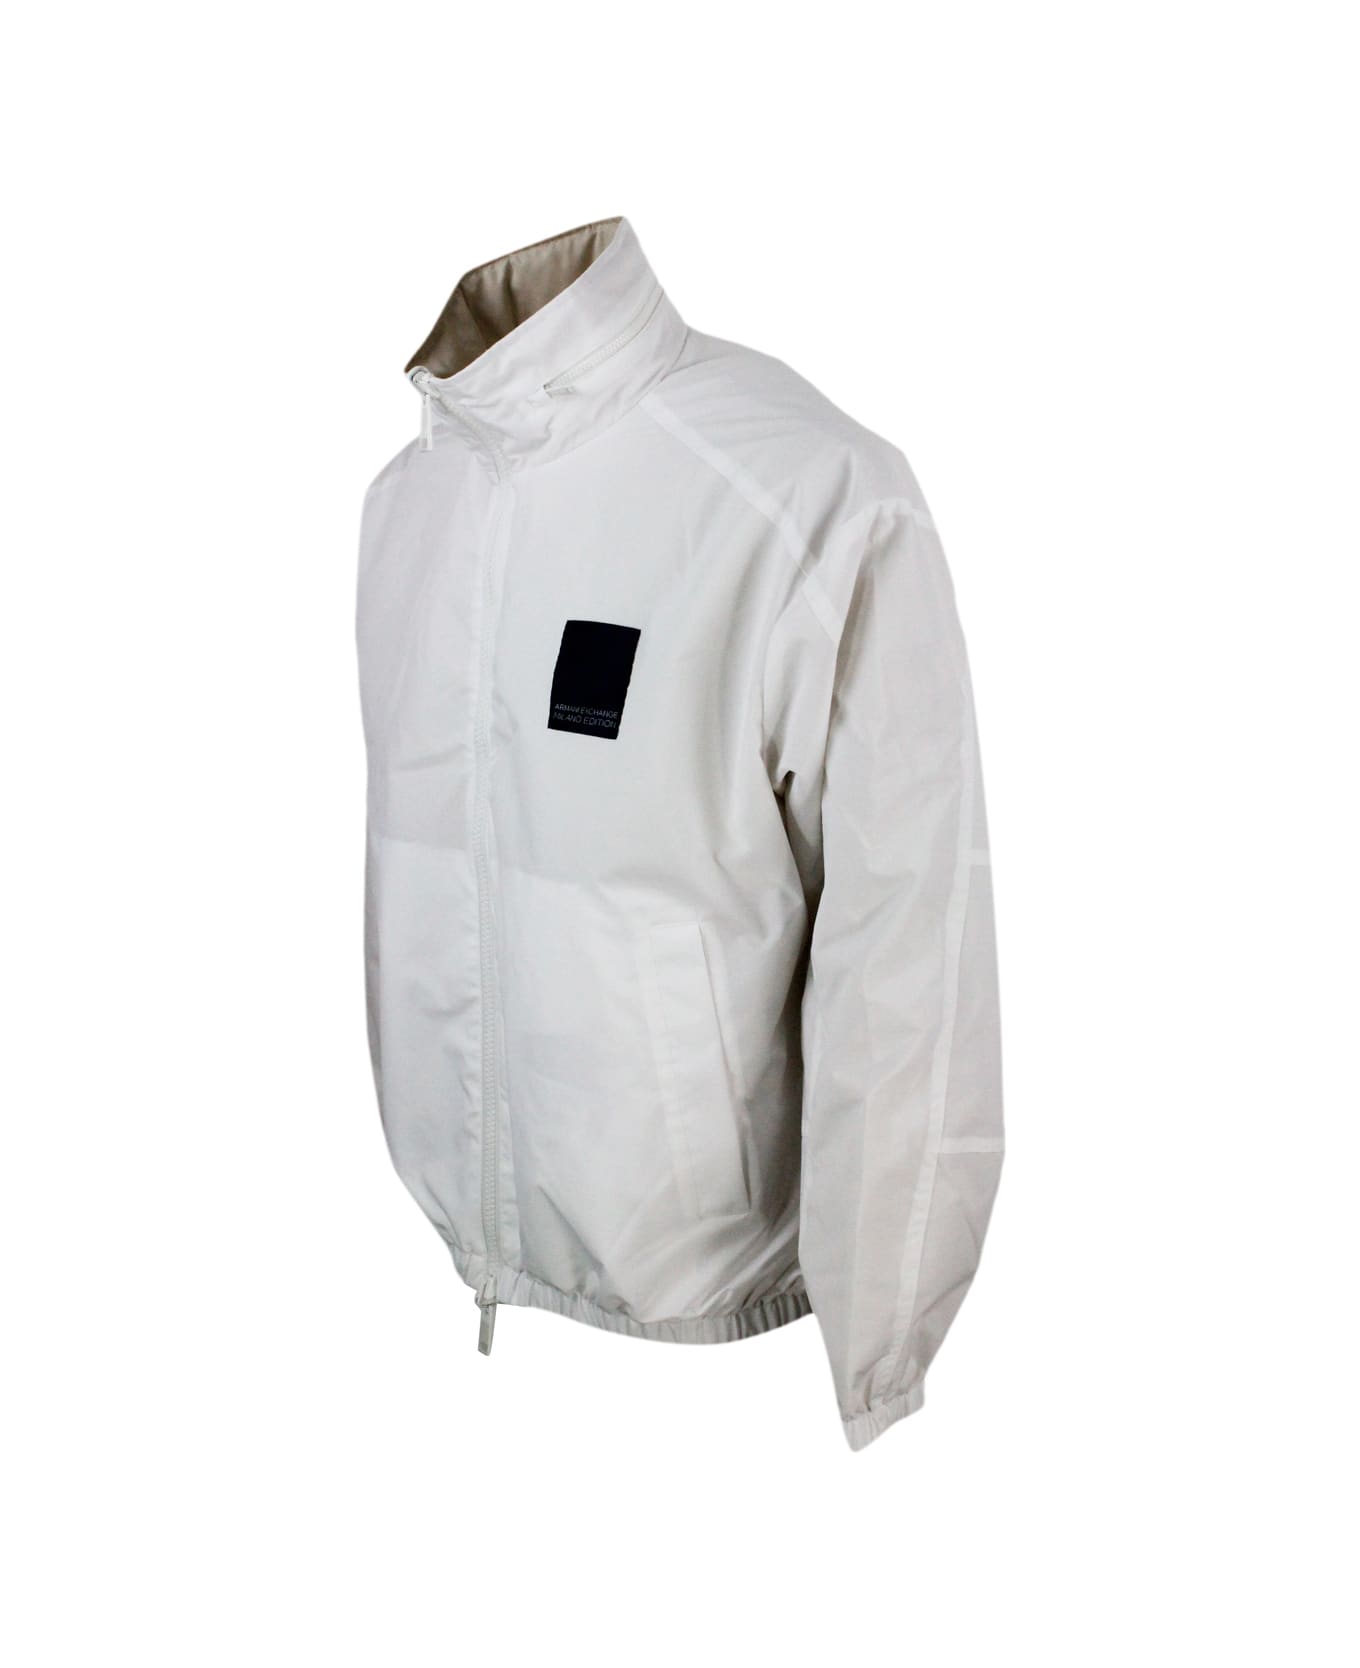 Armani Collezioni Reversible Windproof Jacket In Light Technical Fabric, Milano Edition Line, Zip Closure And Concealed Hood - White